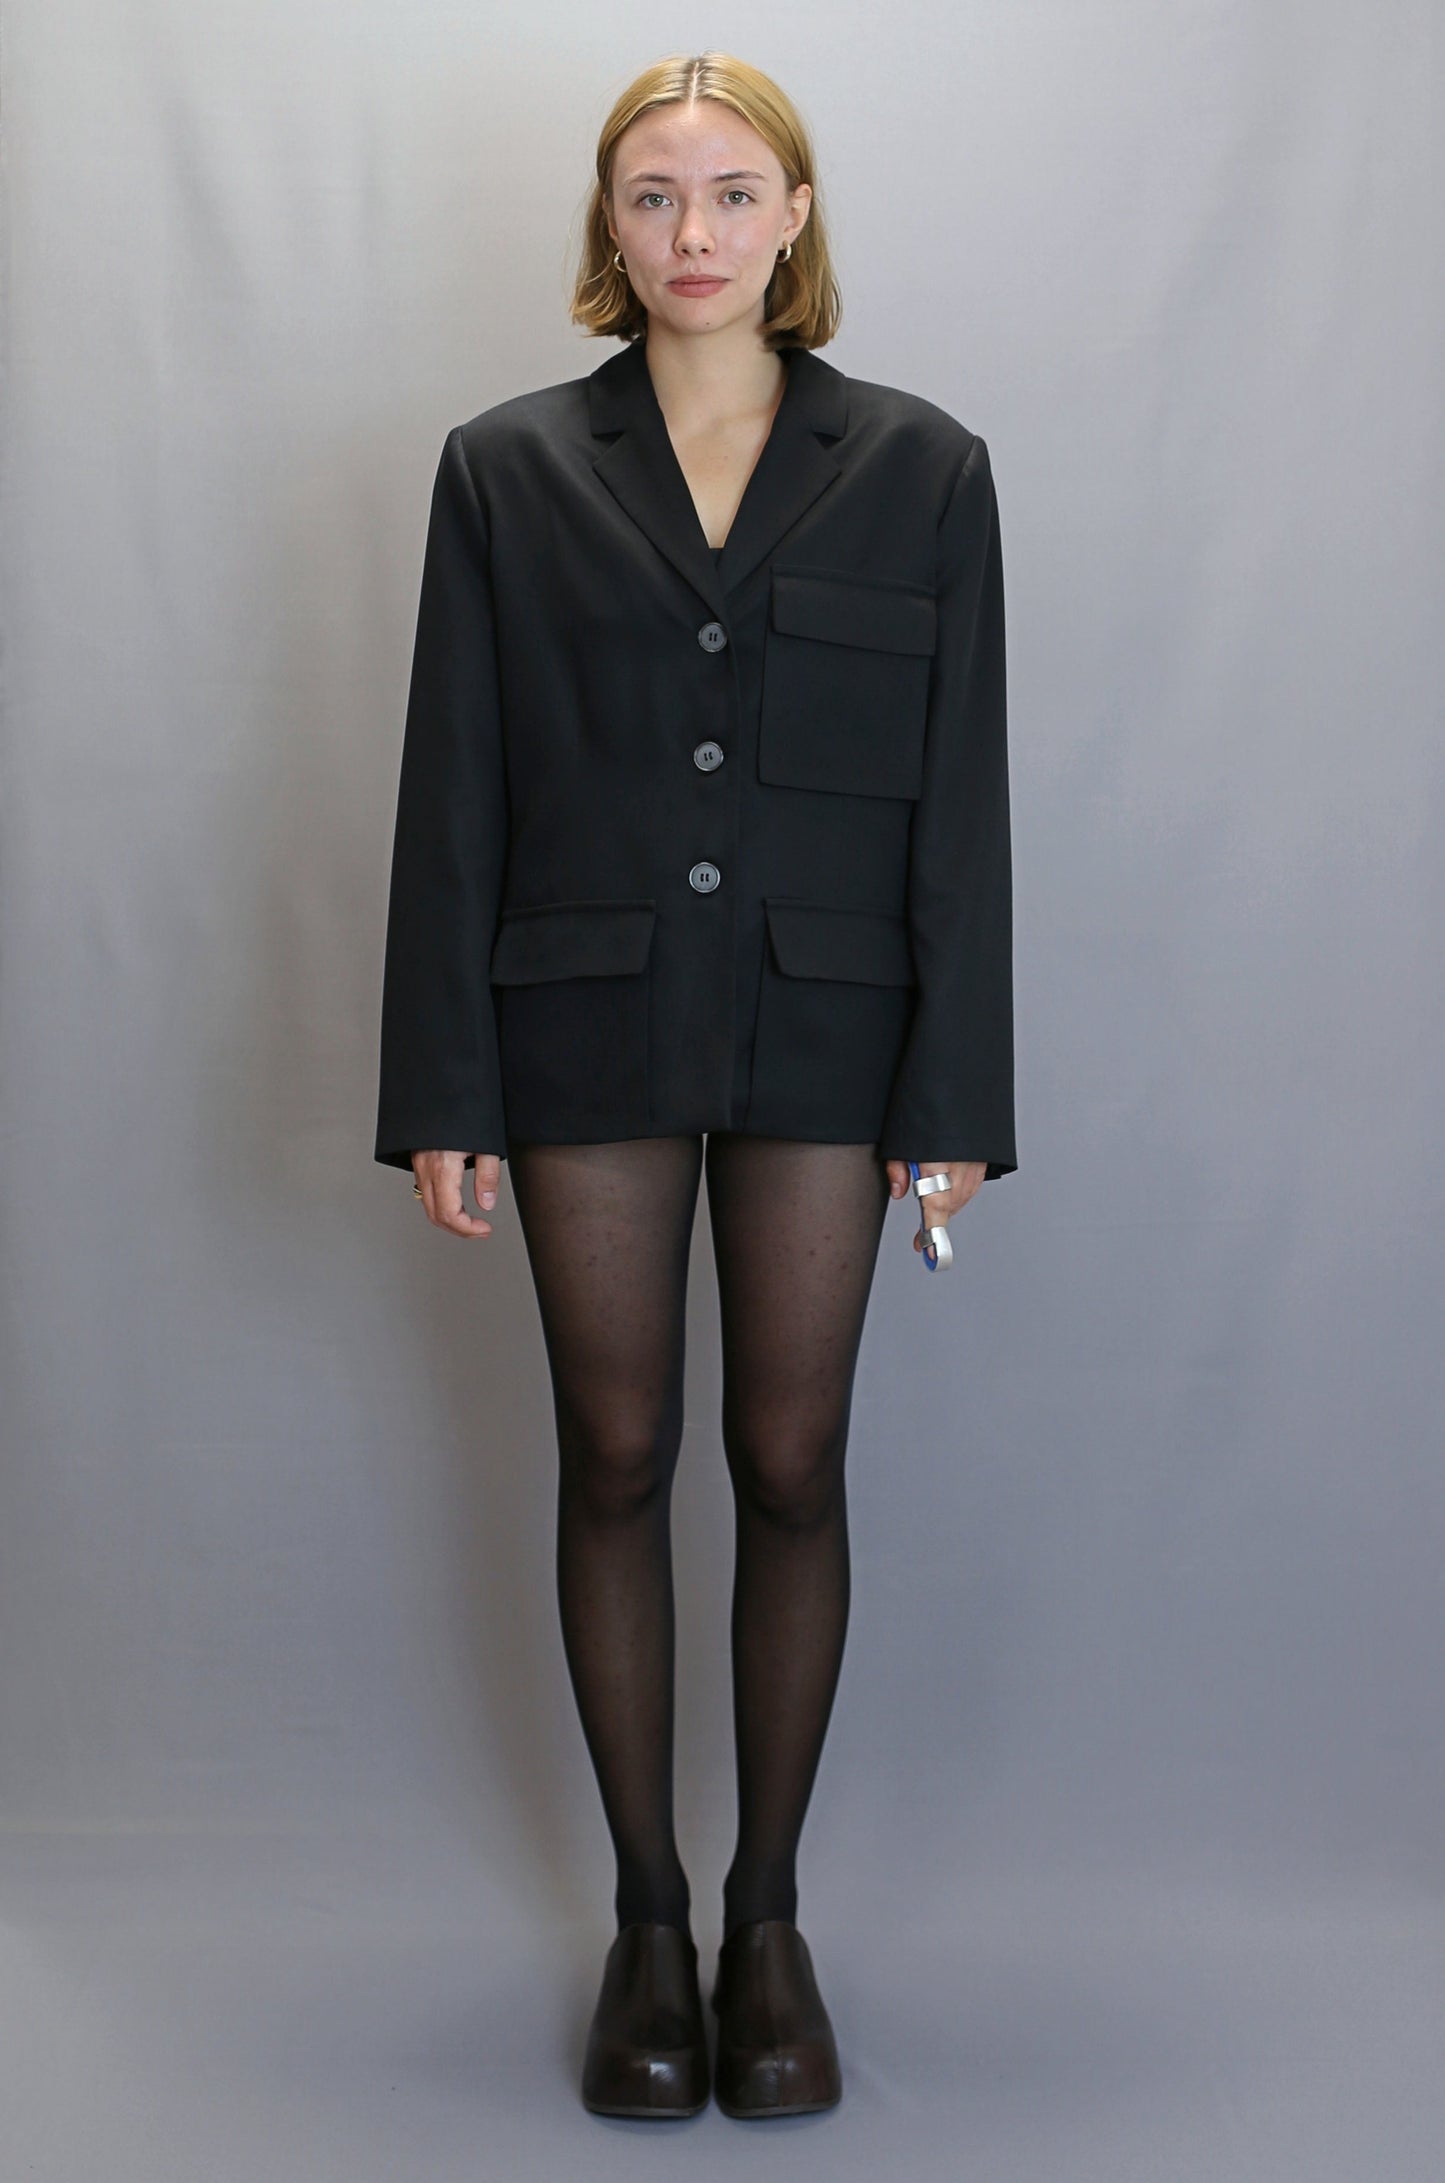 no 009/Two-piece suit with shorts